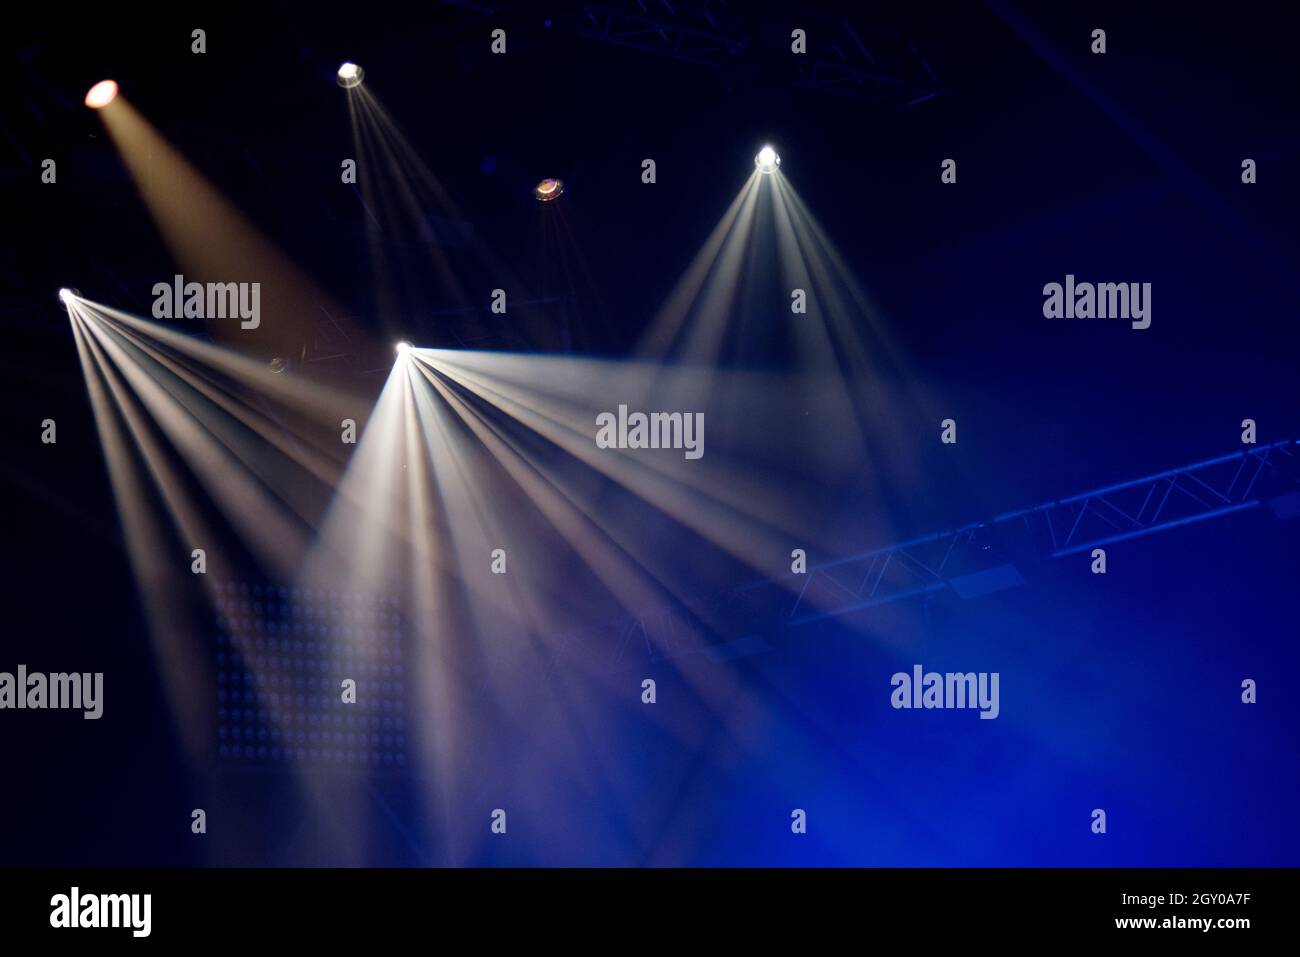 Stage lights glowing in the dark. Live music festival concept background Stock Photo